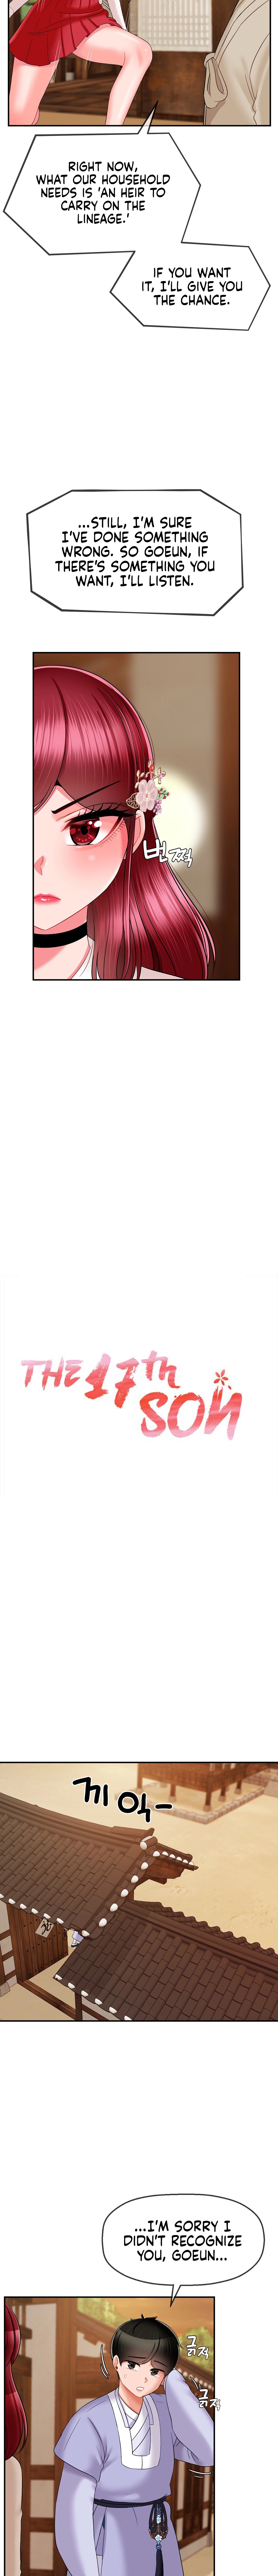 The 17th Son NEW image